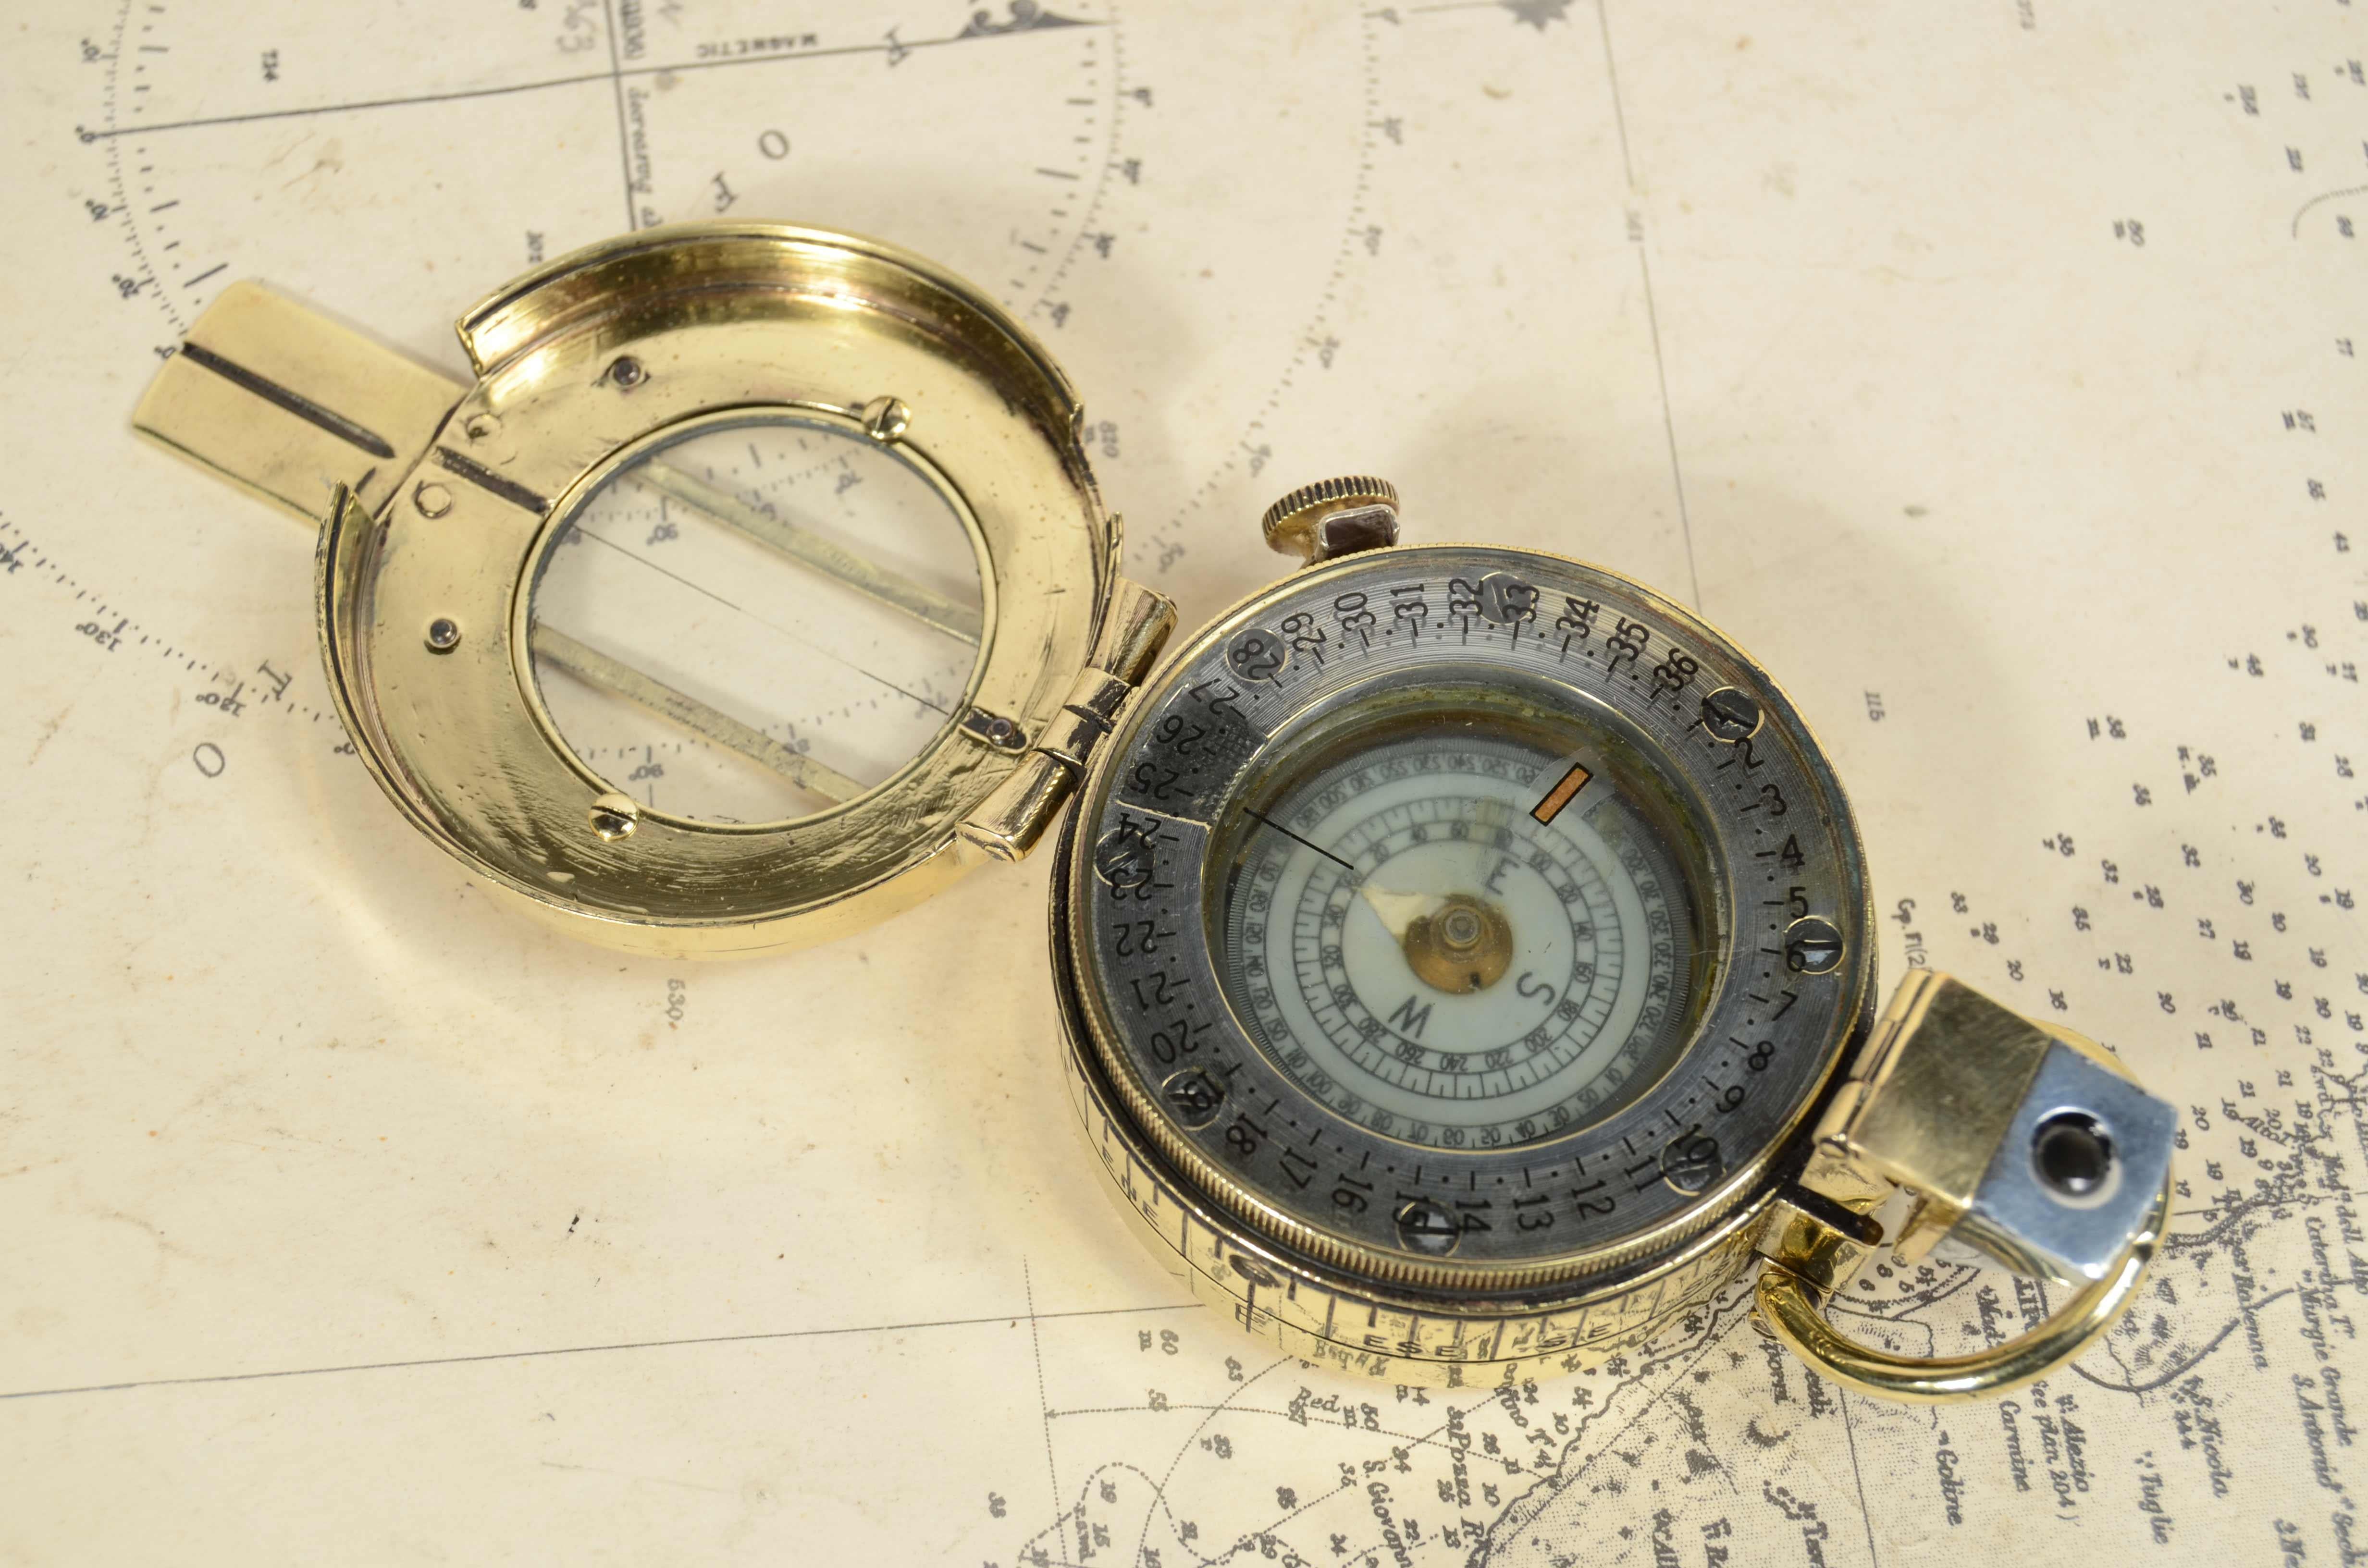 Prismatic compass  by detection signed T.G. Co Ltd London no. B 21681 1940 MK For Sale 2